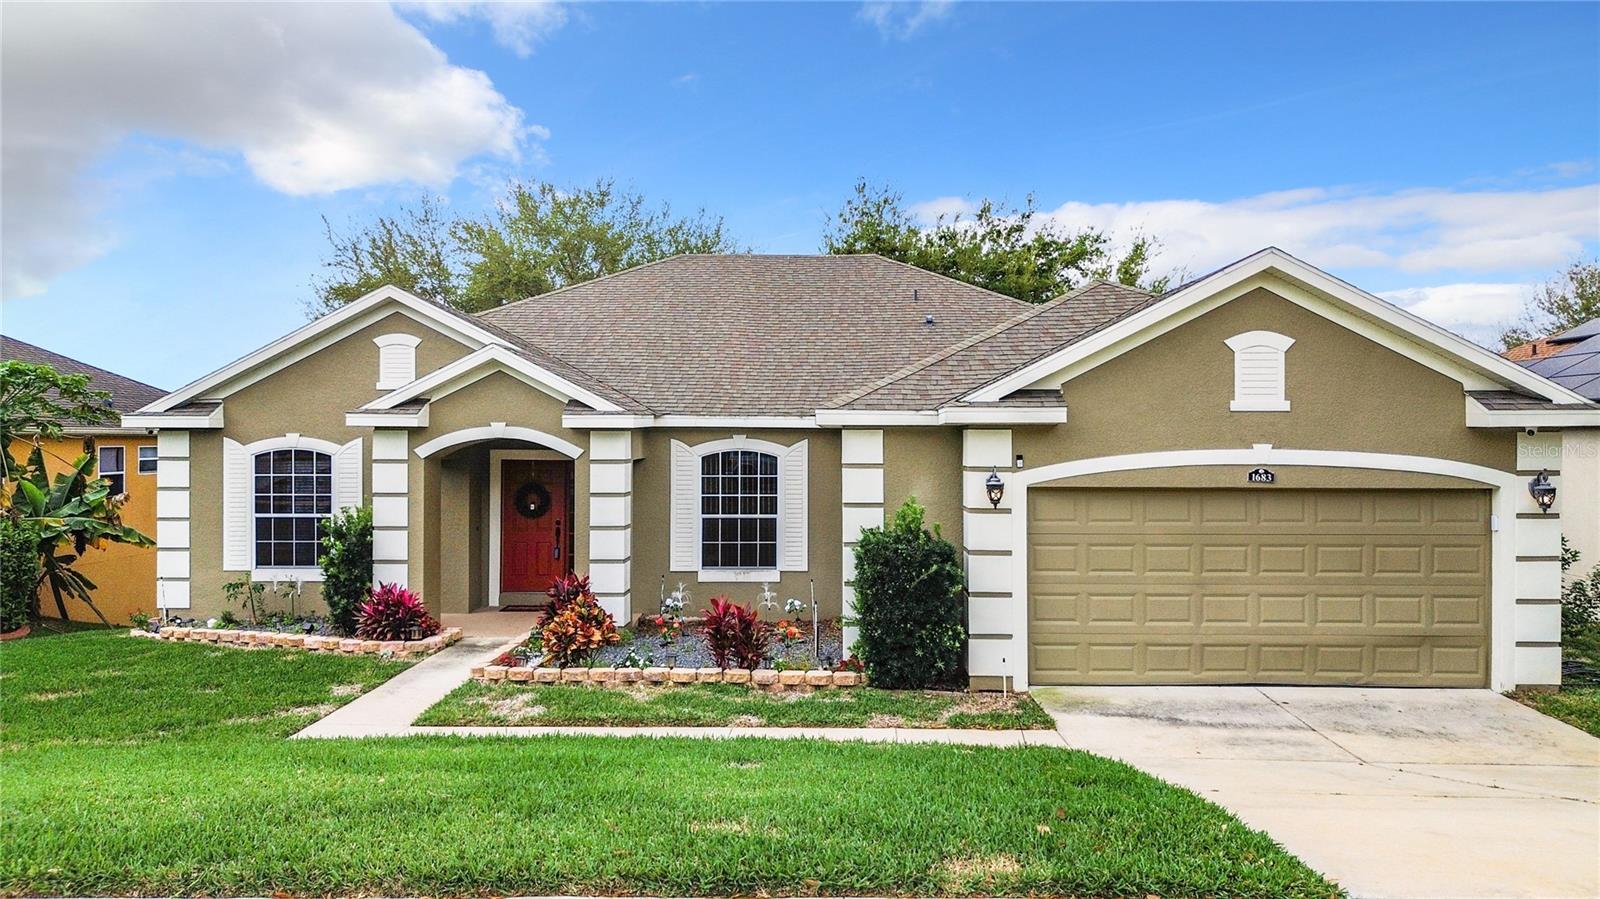 Photo one of 1683 Grandeflora Ave Clermont FL 34711 | MLS O6183786